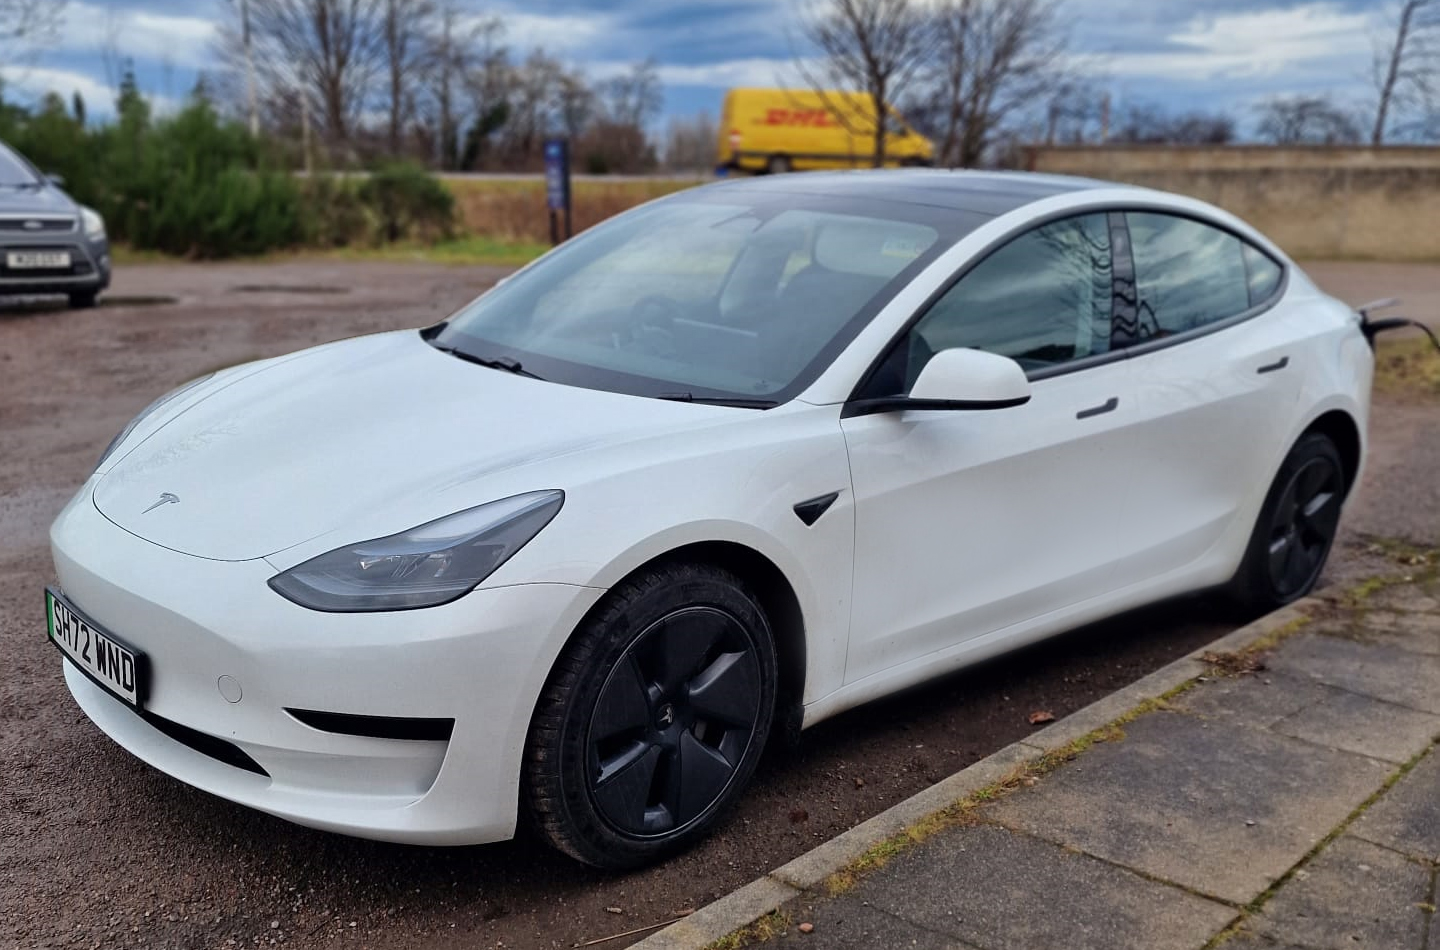 AES Solar on the road with a blank Tesla Model 3 ready to be branded